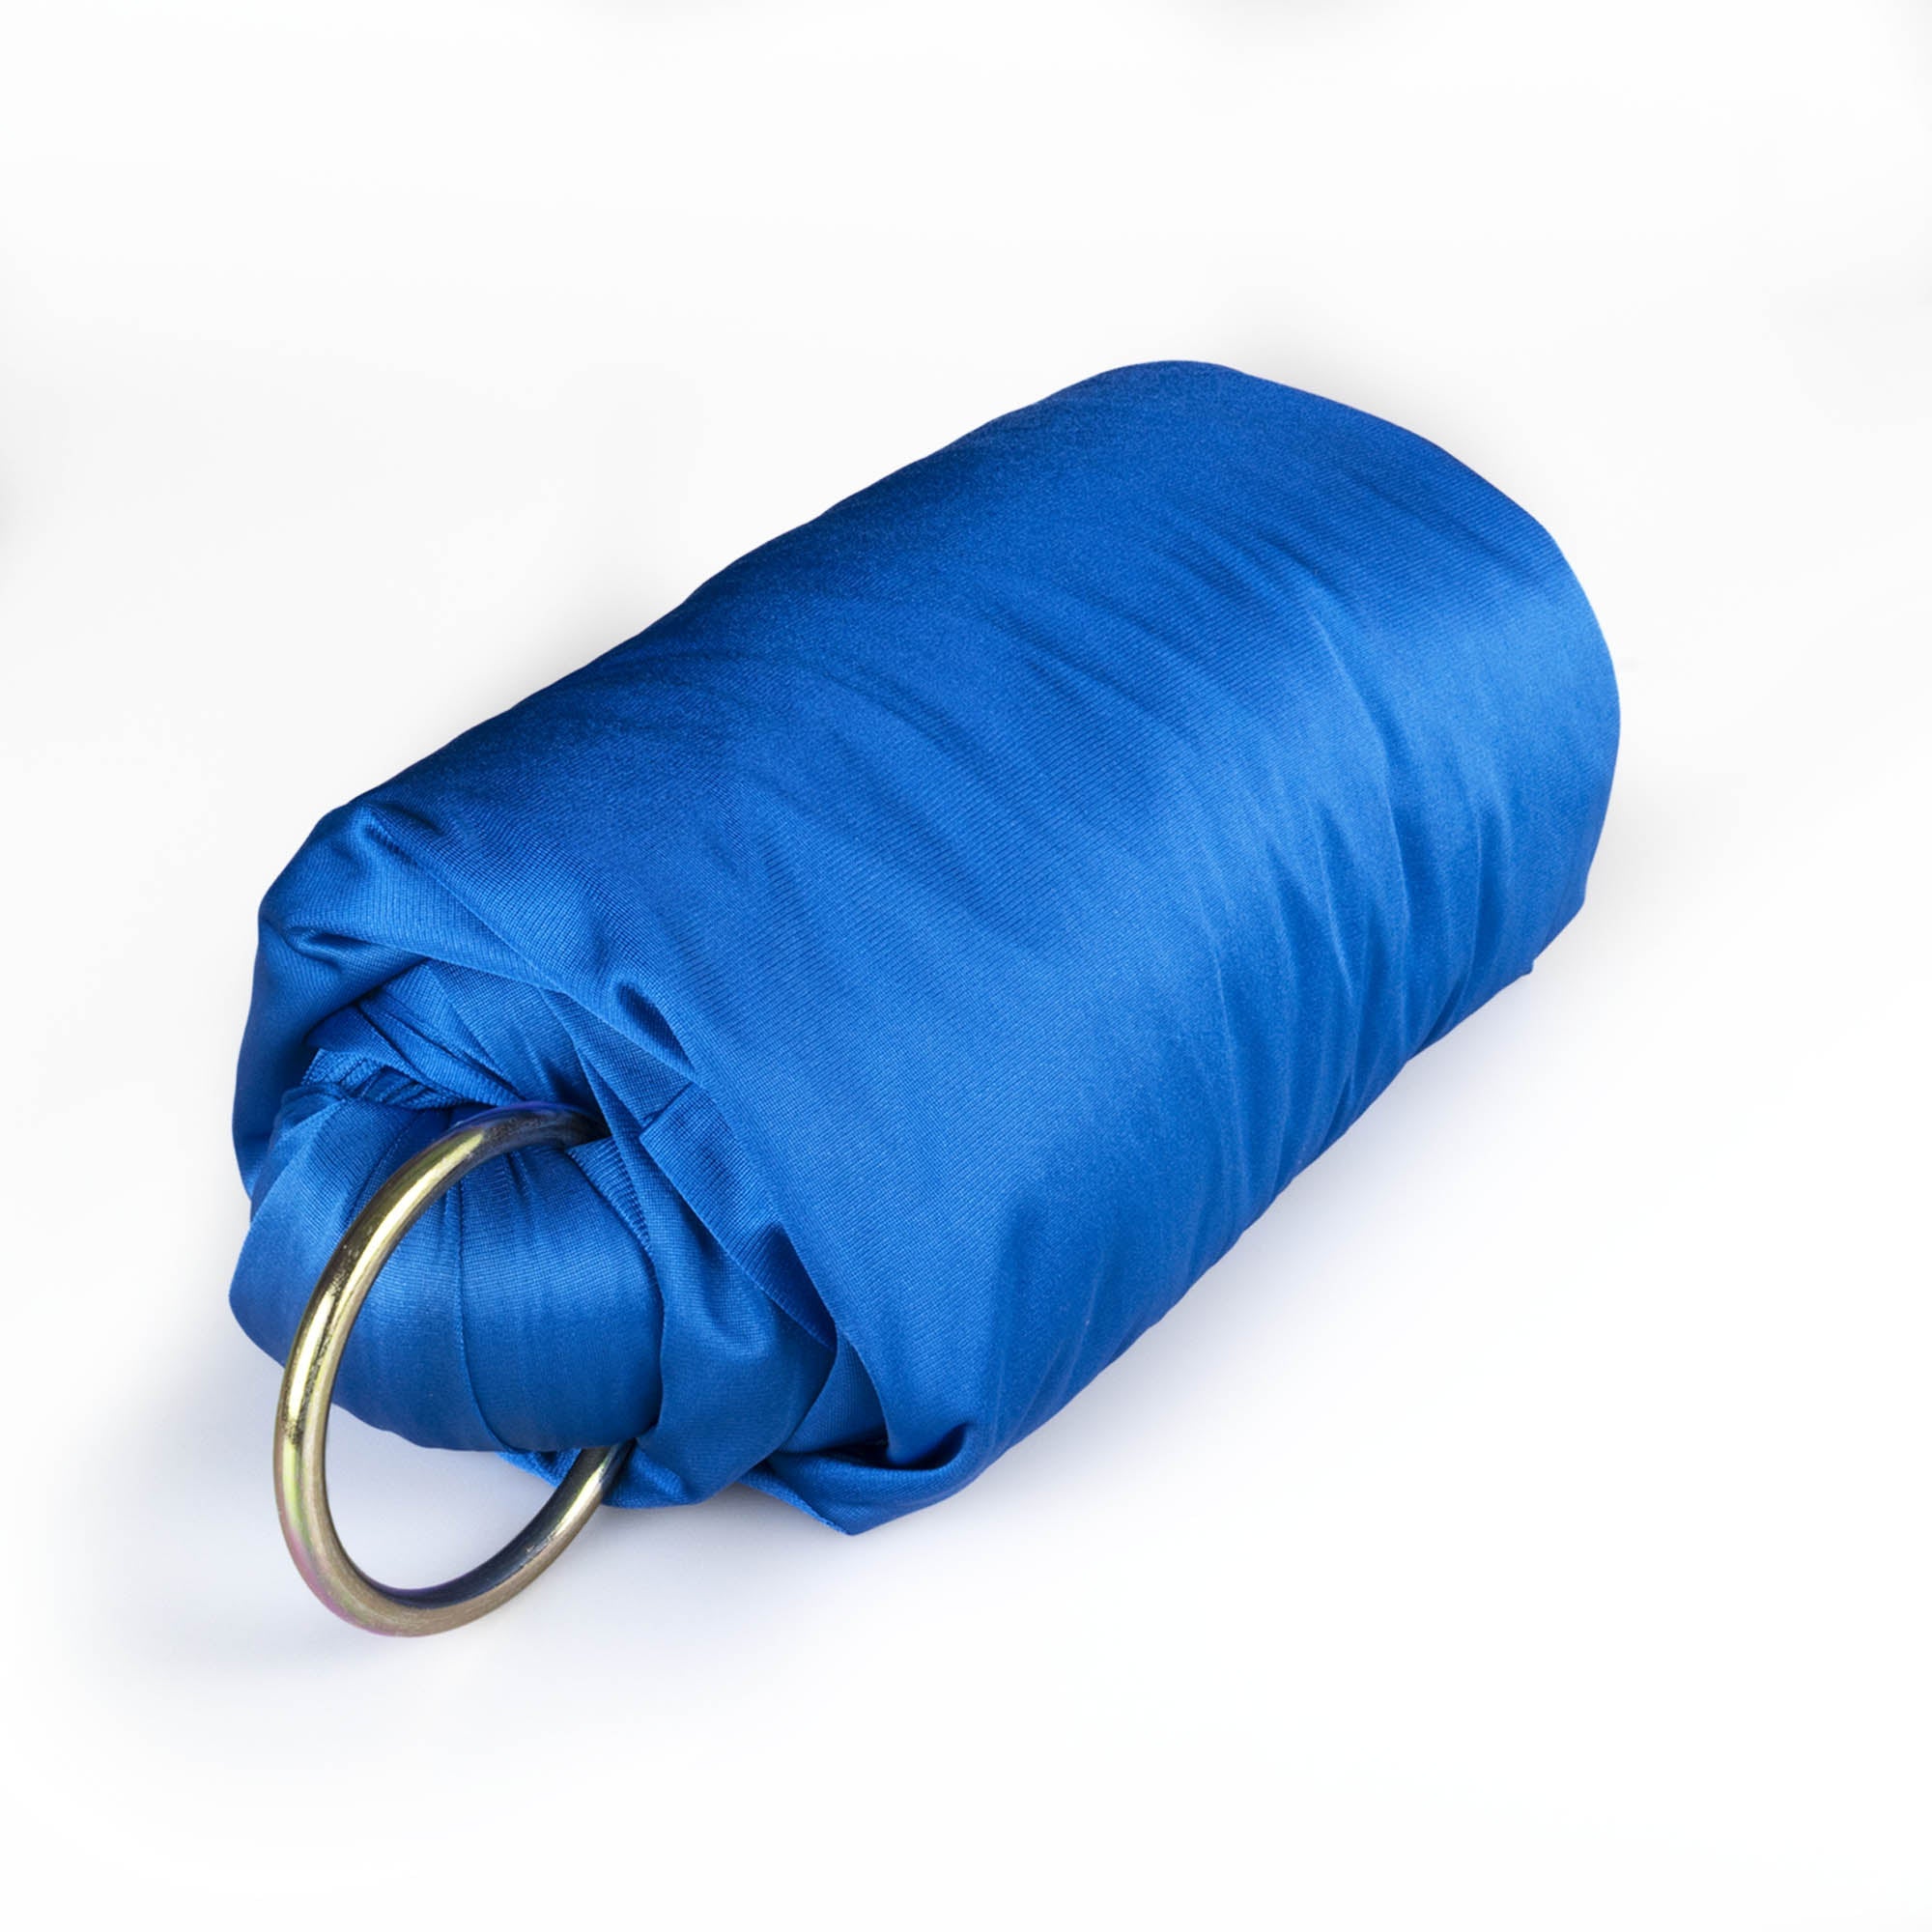 Royal blue yoga hammock rolled up with rings attached